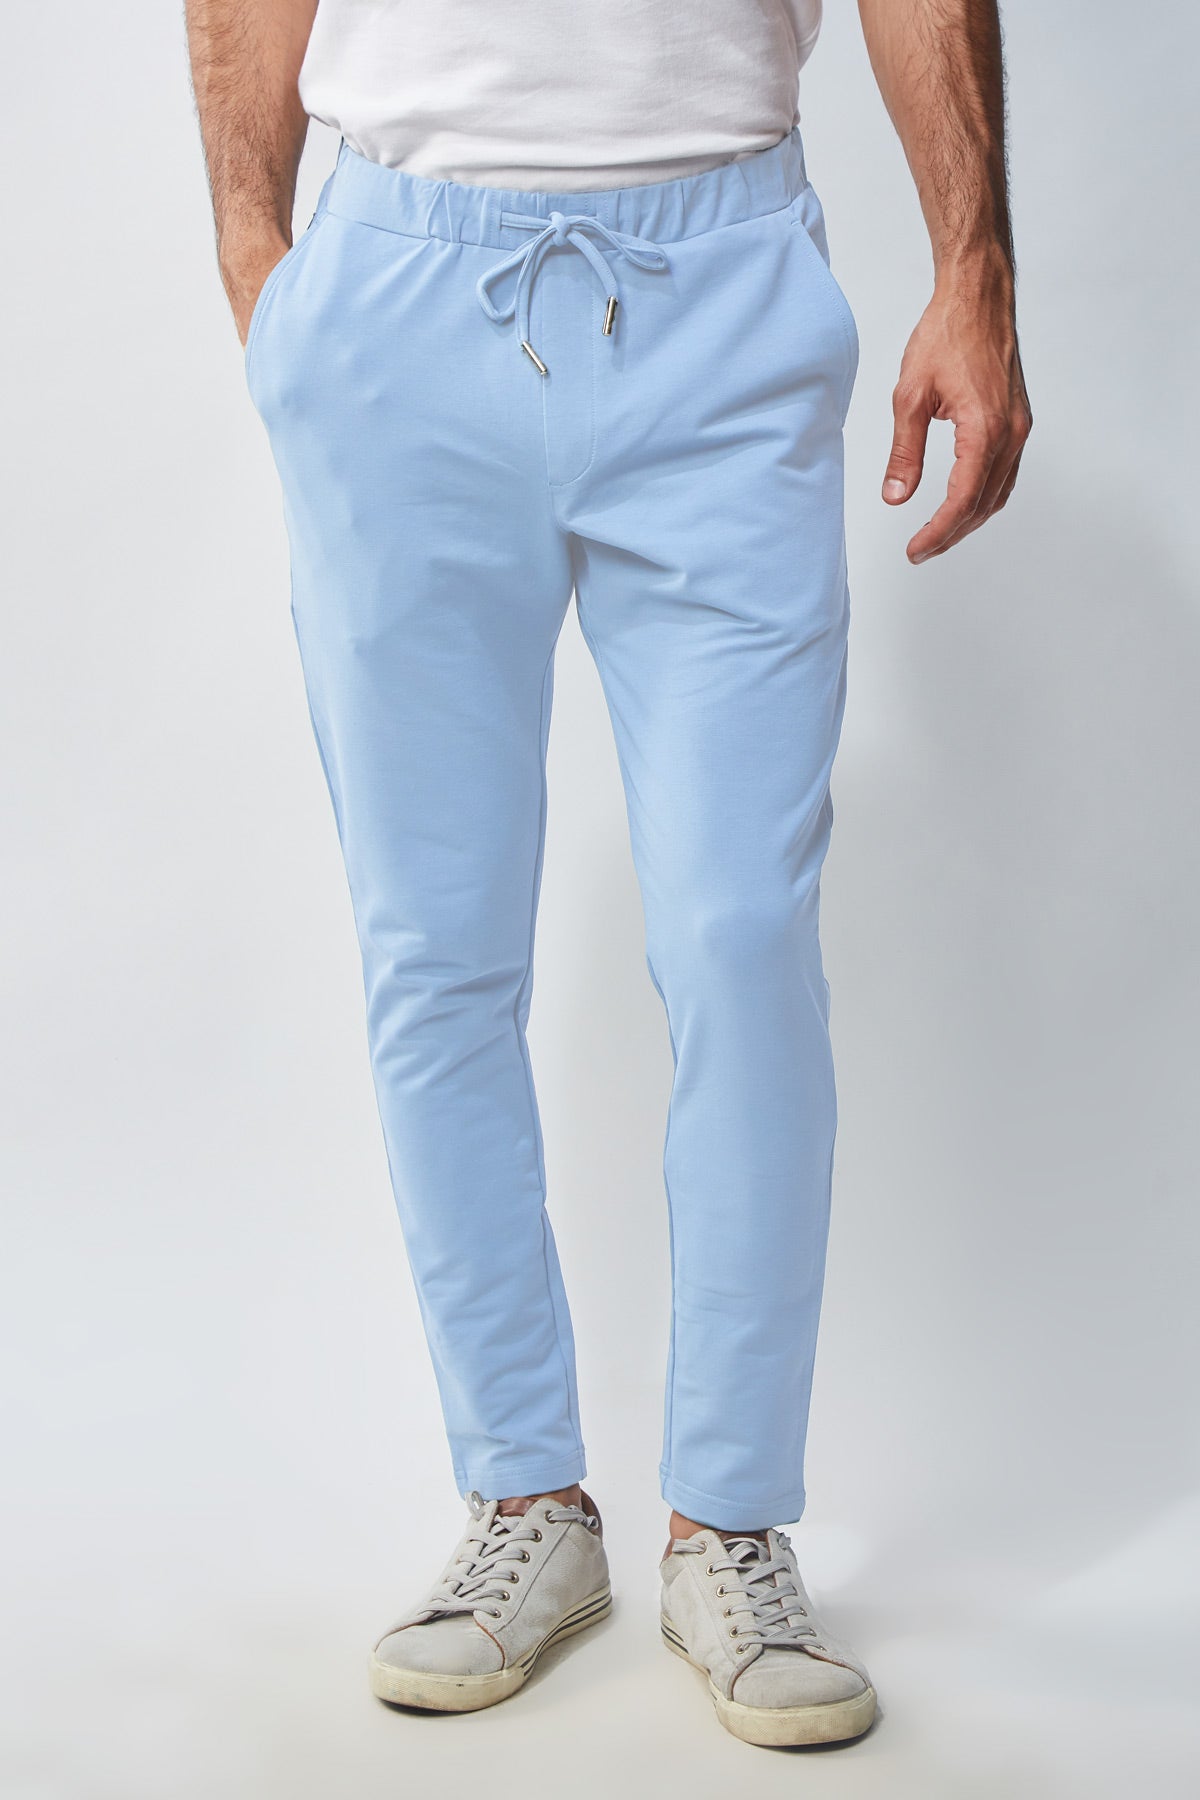 Buy Blue Trousers & Pants for Men by BEYOURS Online